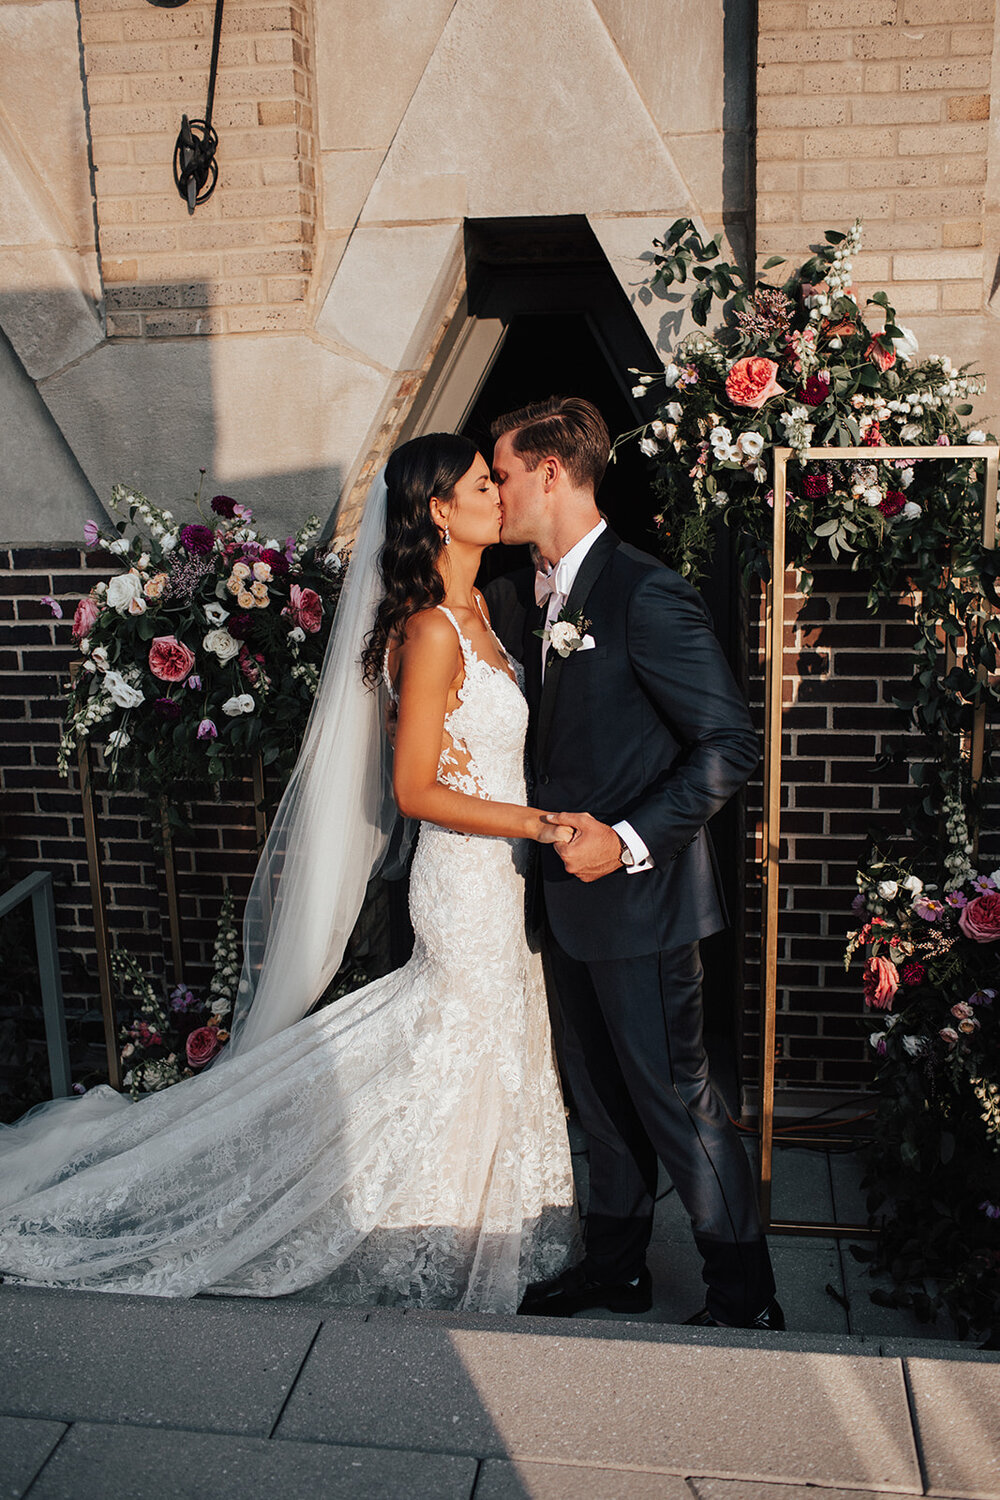 The Robey Wicker Park Wedding | Chicago Intimate Wedding | Chicago Summer Wedding | Your Day by MK